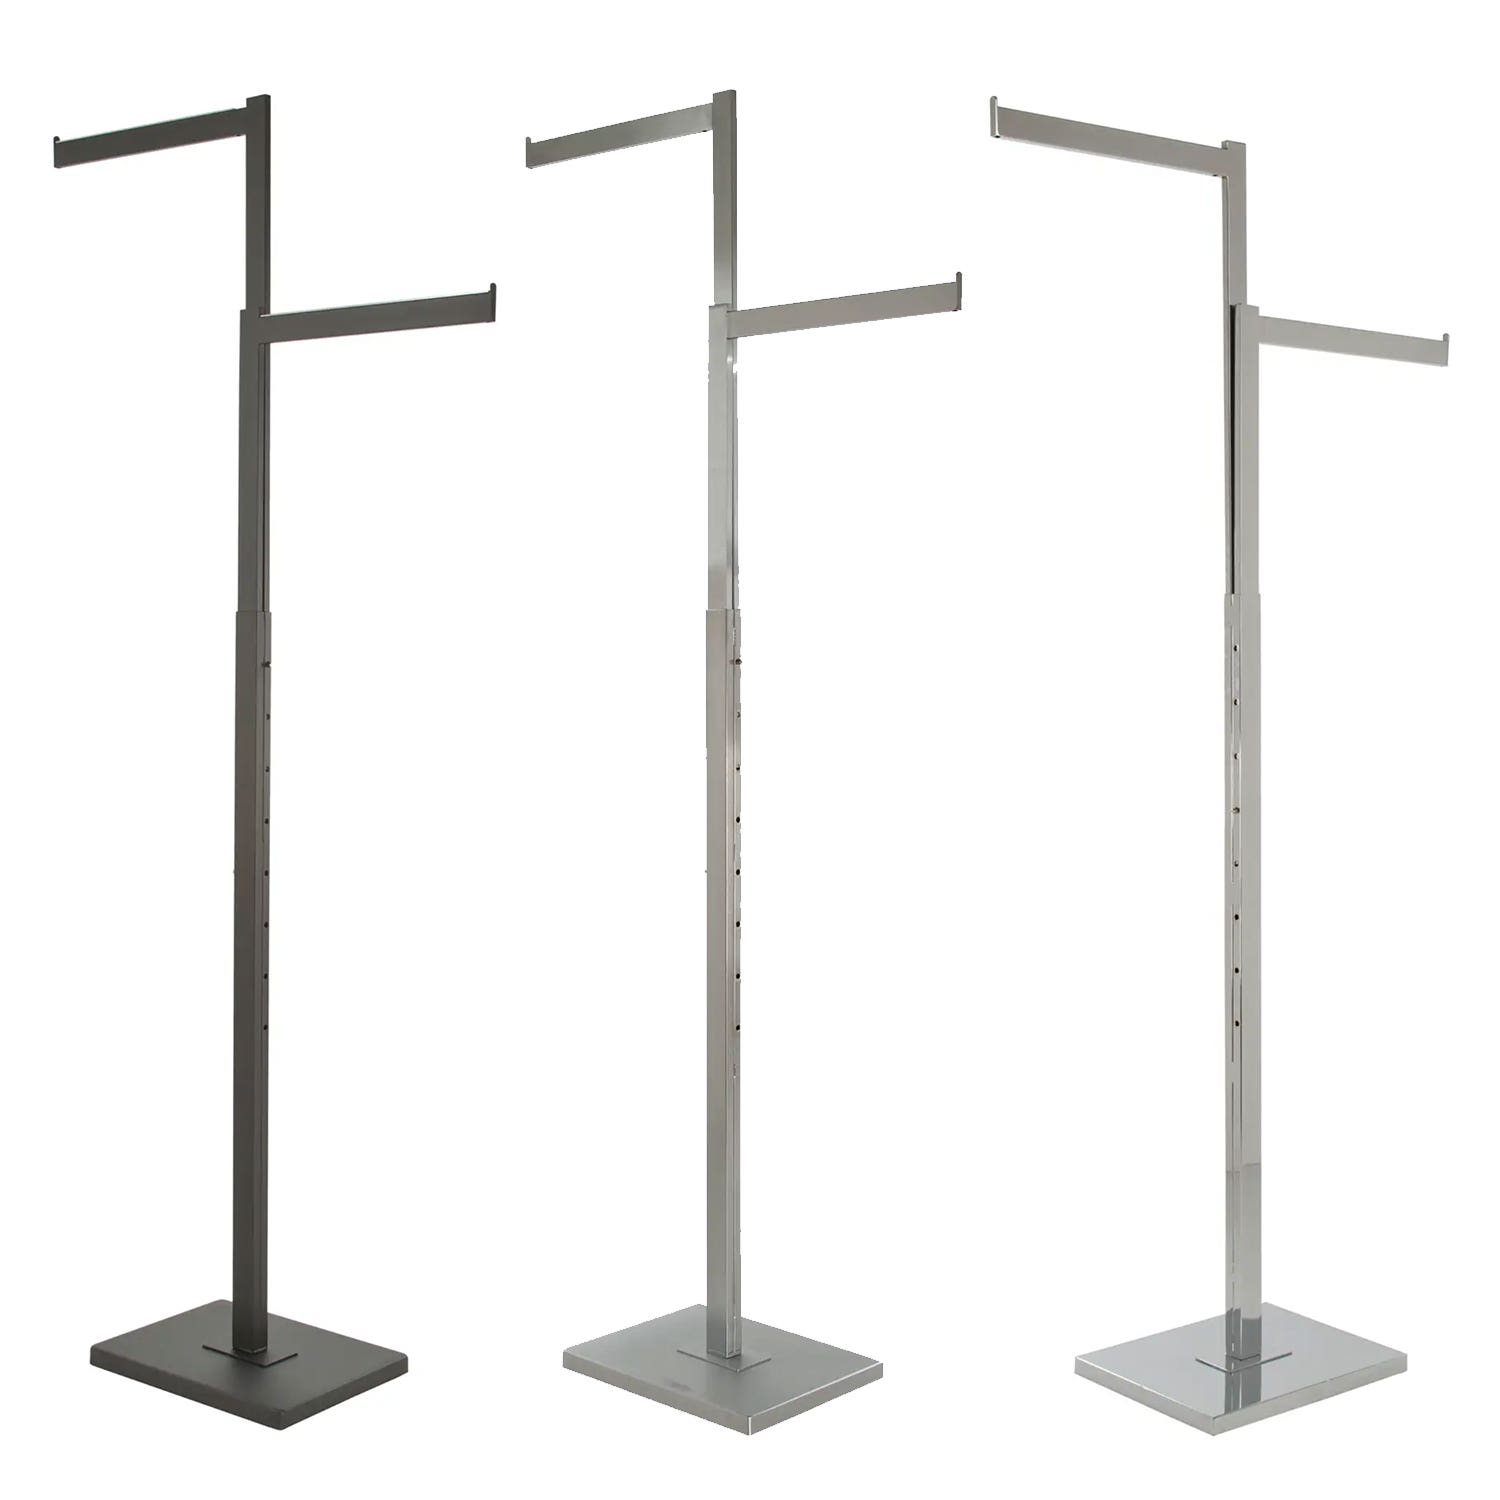 NEW 2 WAY STRAIGHT ARM HEAVY DUTY CLOTHES RAIL GARMENT STAND 